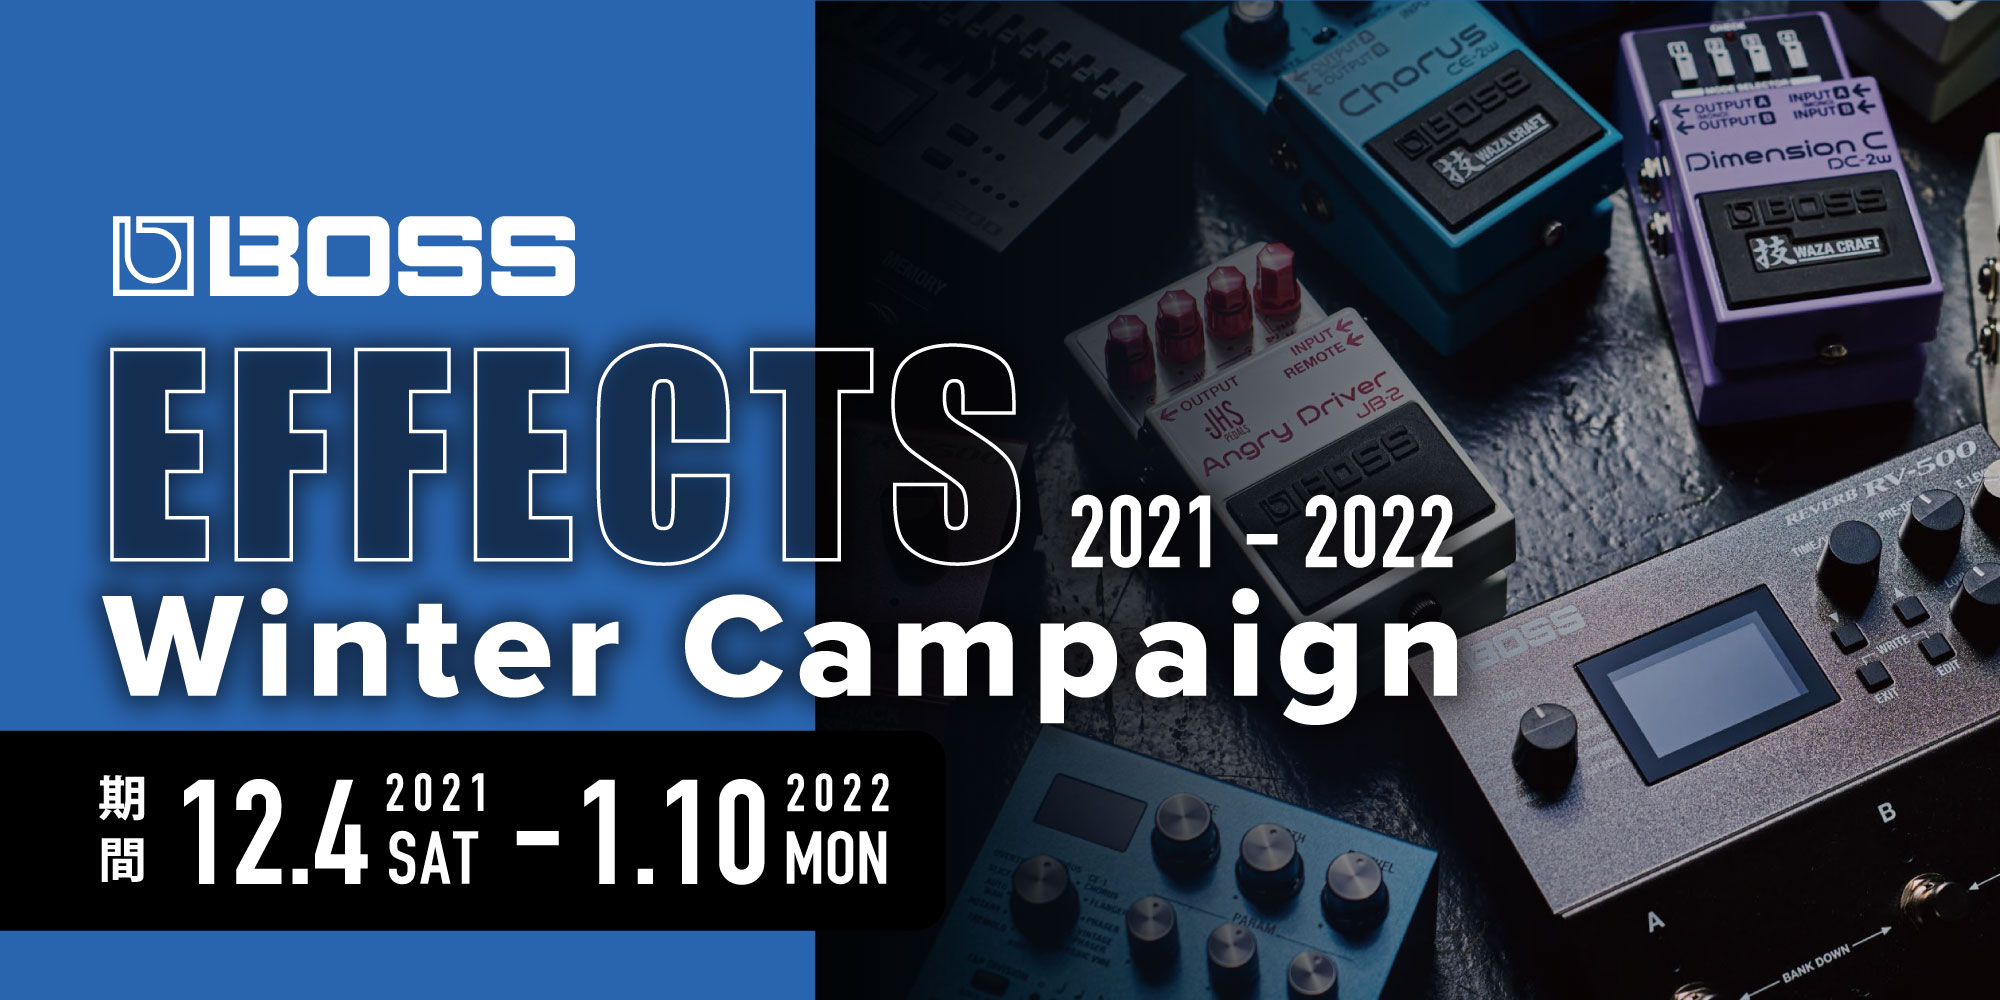 BOSS EFFECTS Winter Campaign 2021-2022